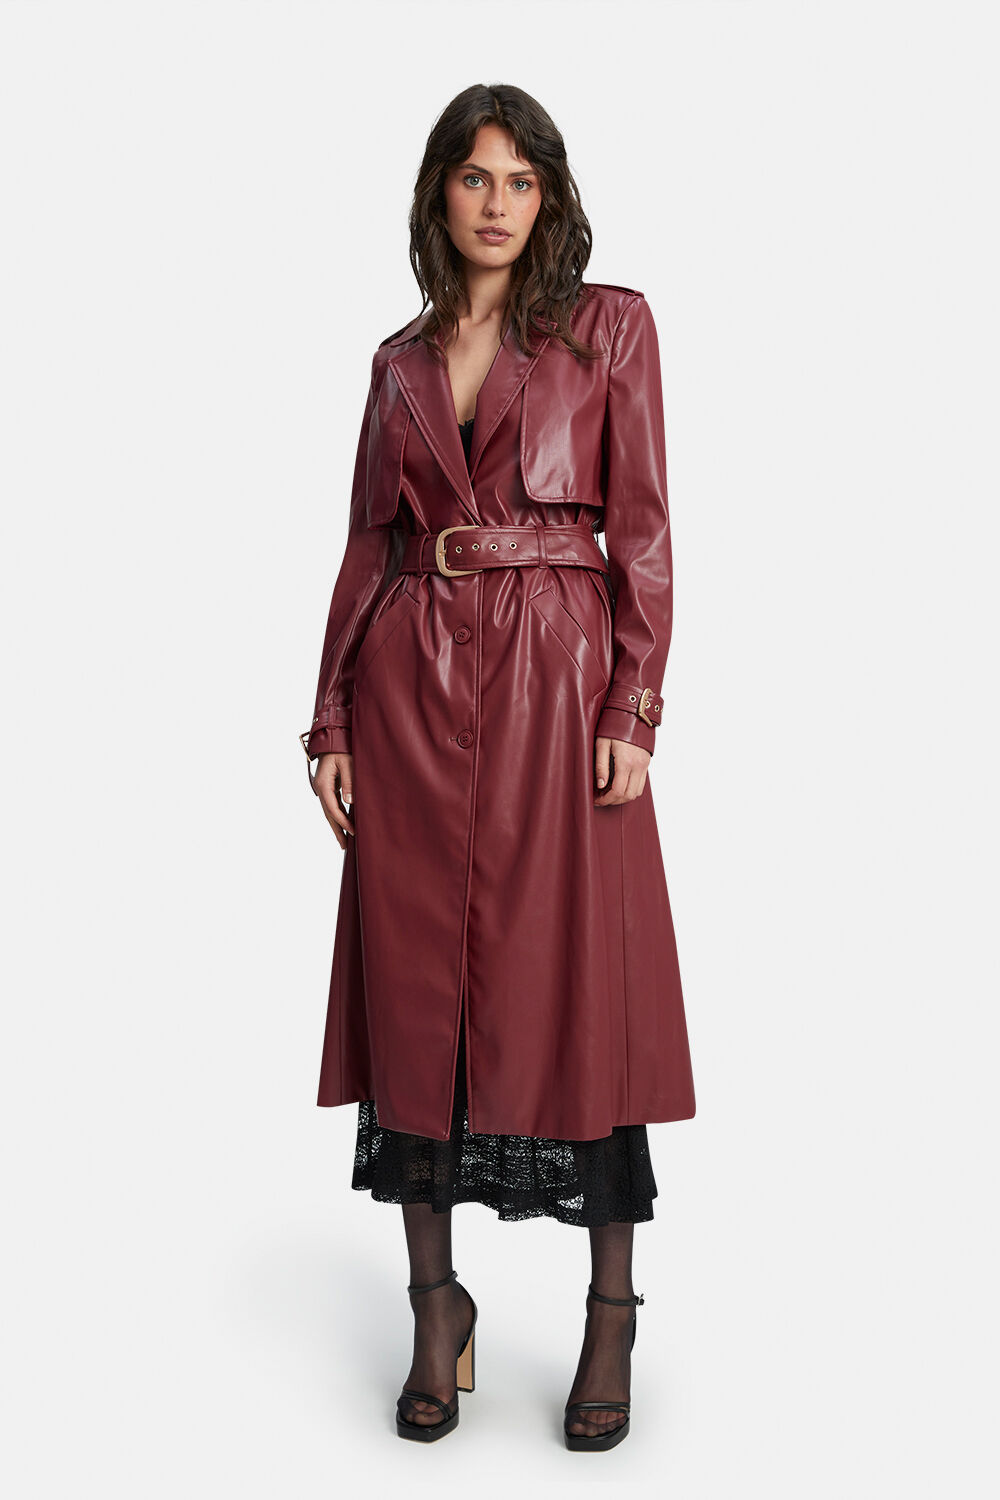 VEGAN LEATHER TRENCH COAT in colour BURGUNDY